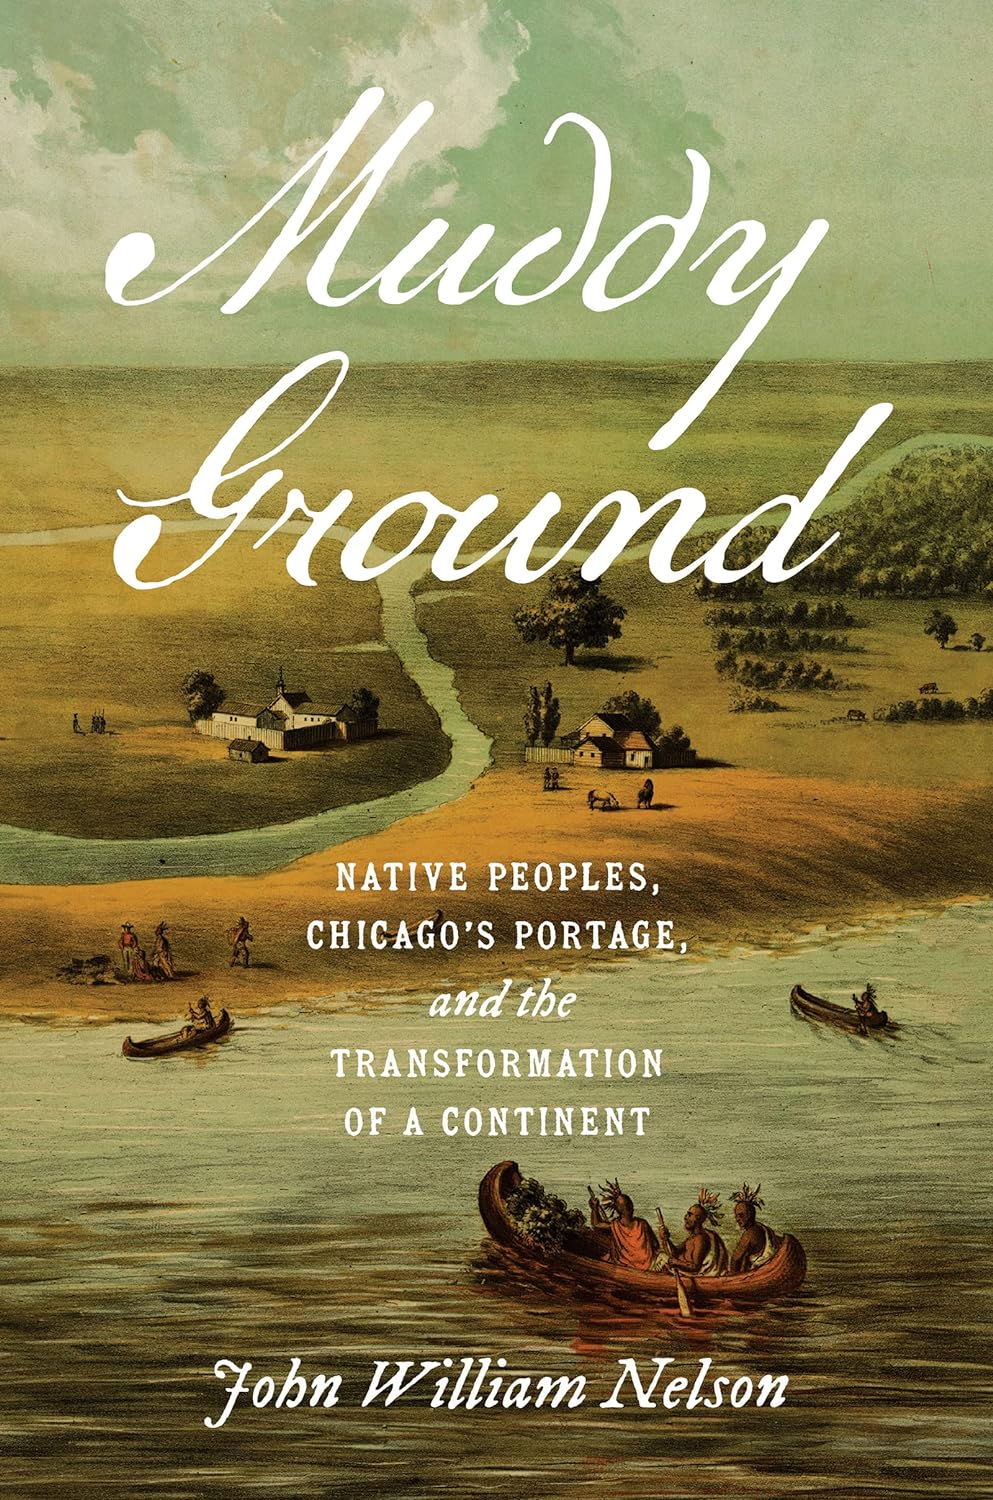 Muddy Ground: Native Peoples, Chicago's Portage, and the Transformation of a Continent by John William Nelson